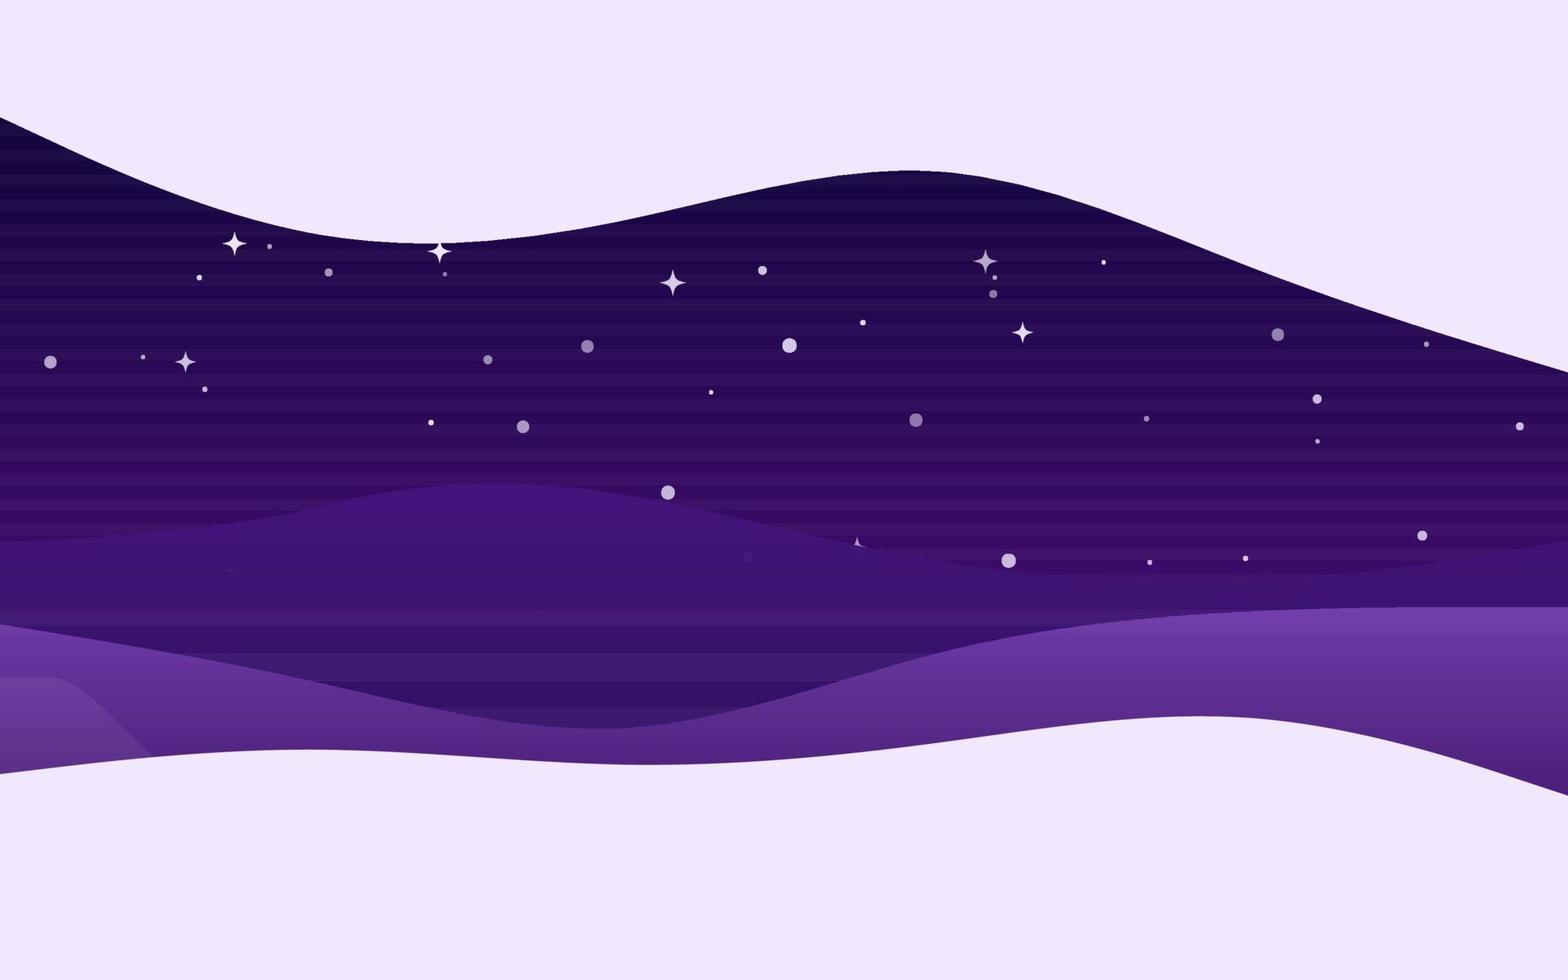 Creative Waves Night Purple background. Dynamic shapes composition vector